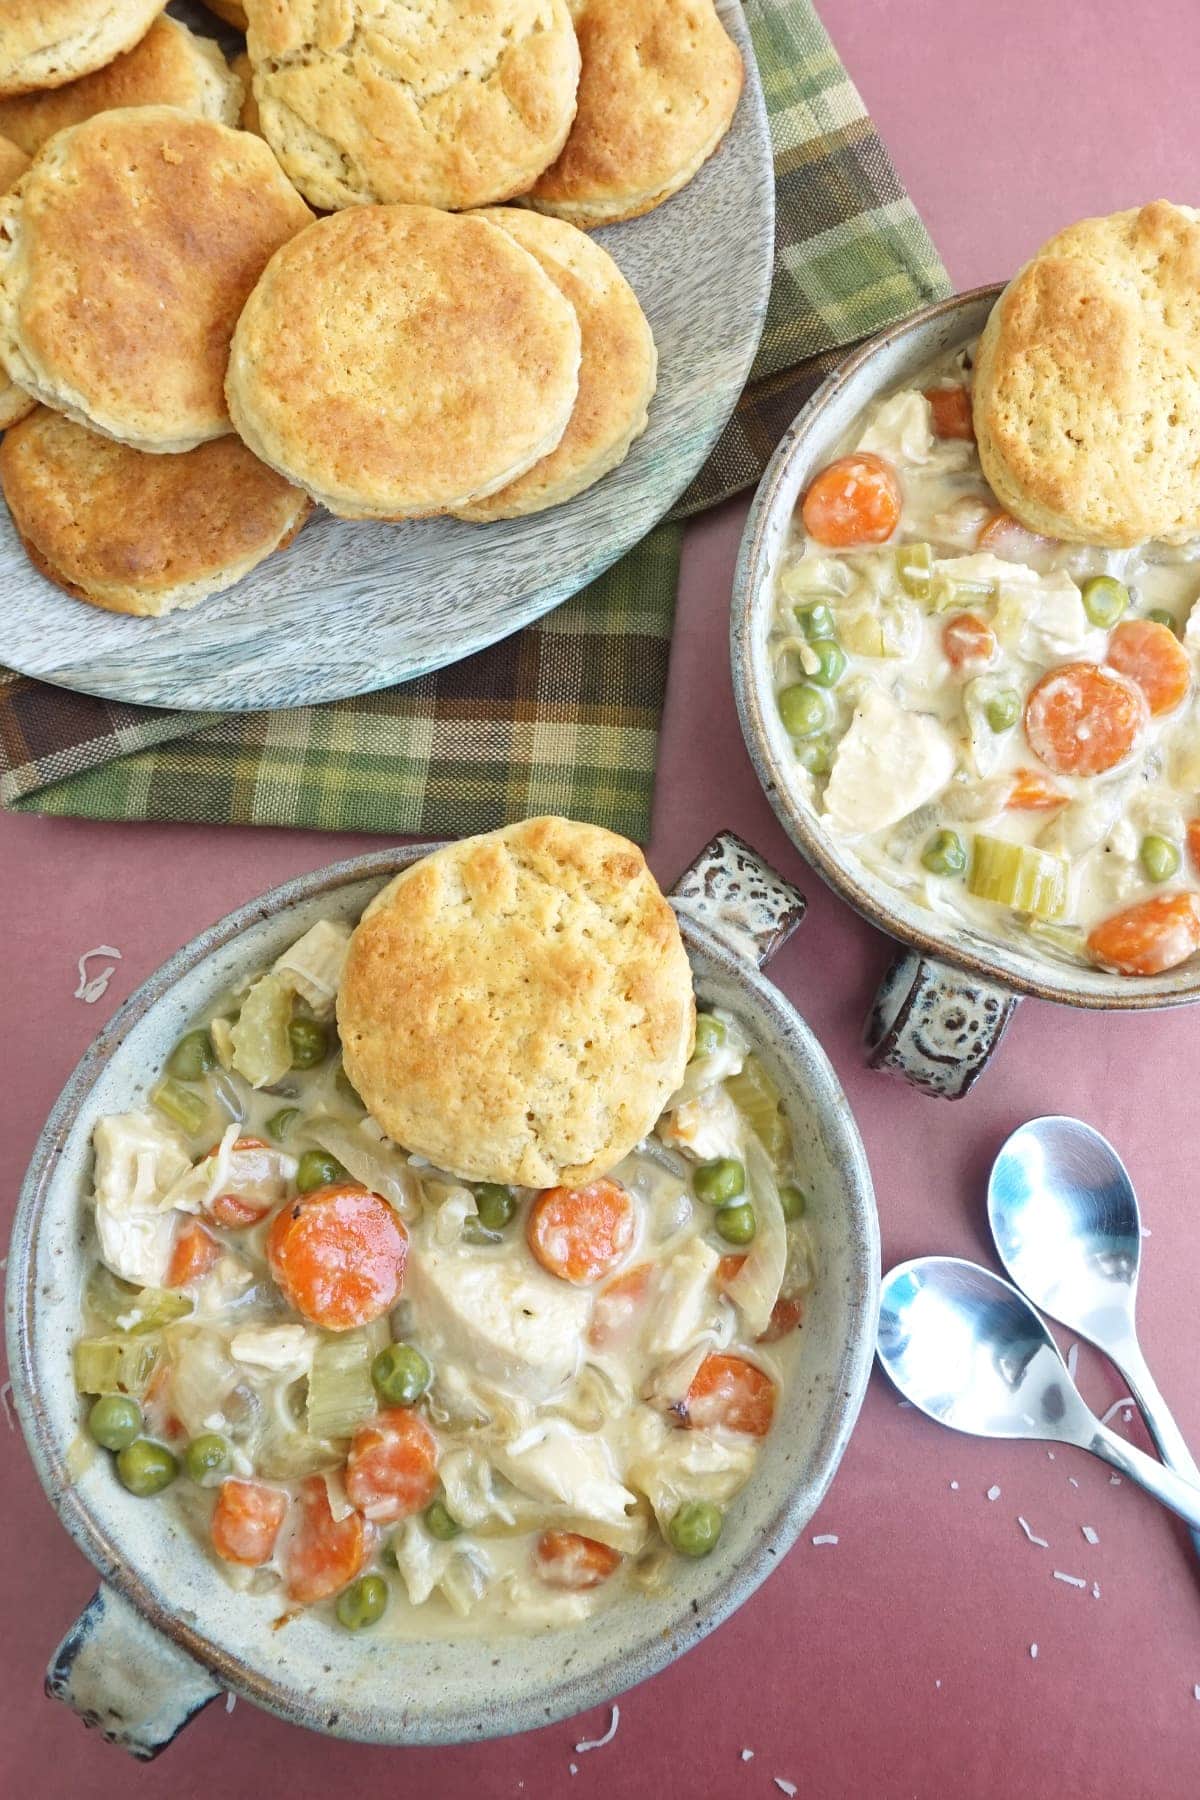 Two bowls of Crustless Chicken Pot Pie with a plate of biscuits on the side